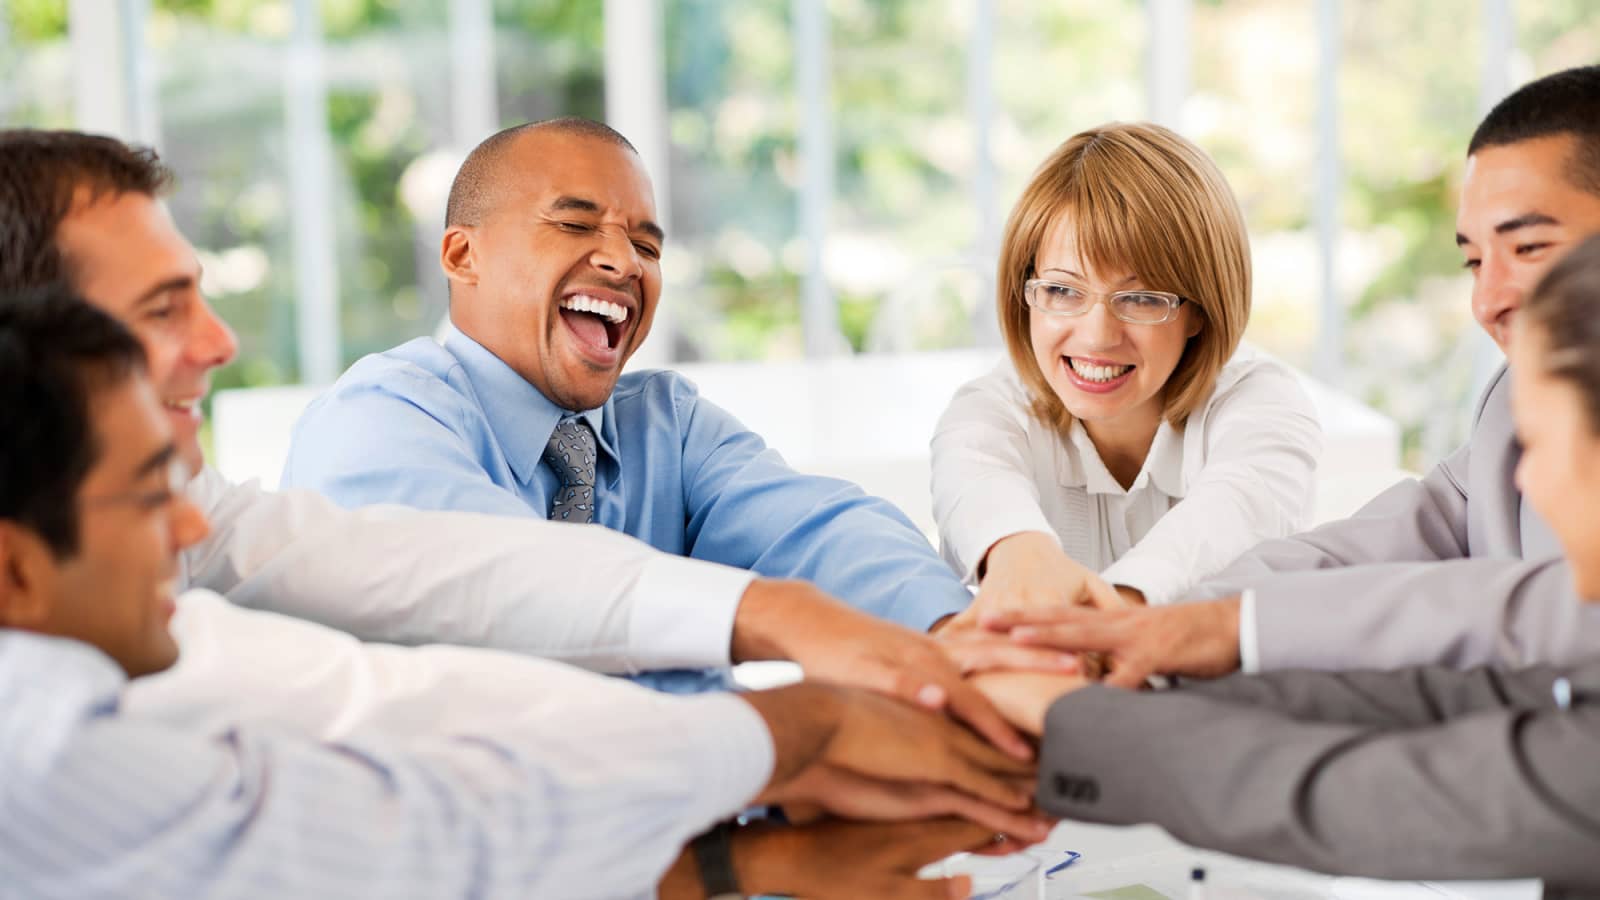 Why work friendships are critical for long-term happiness